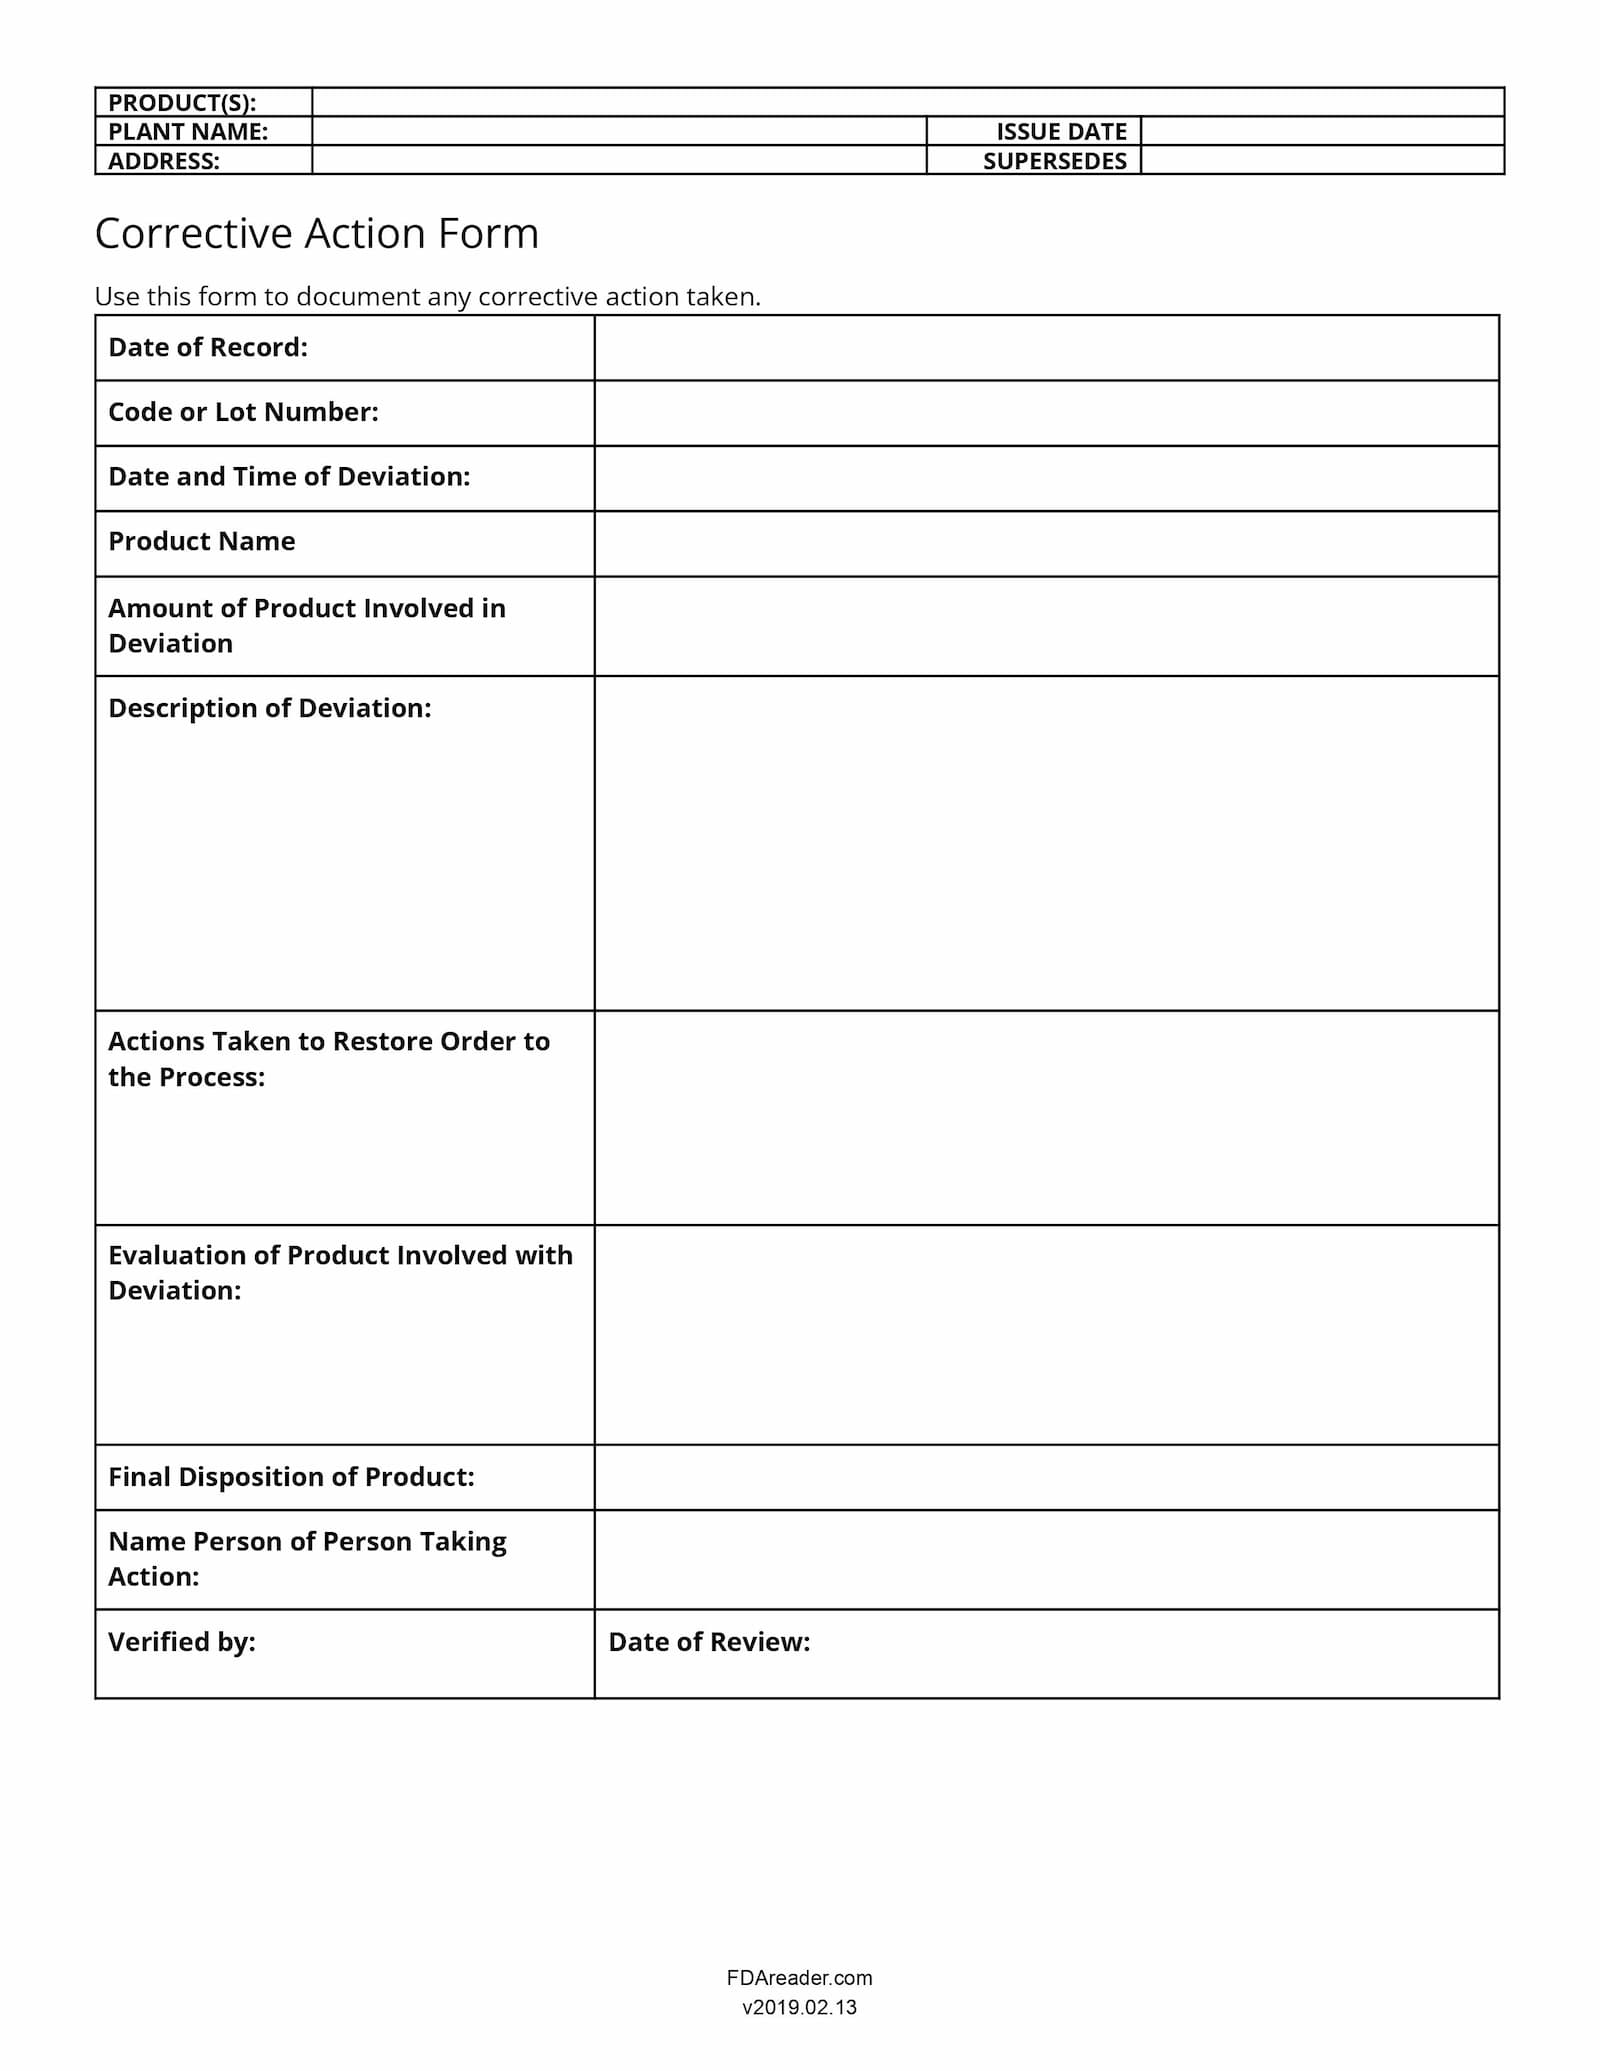 Corrective action form template from the Food and Drug Administration